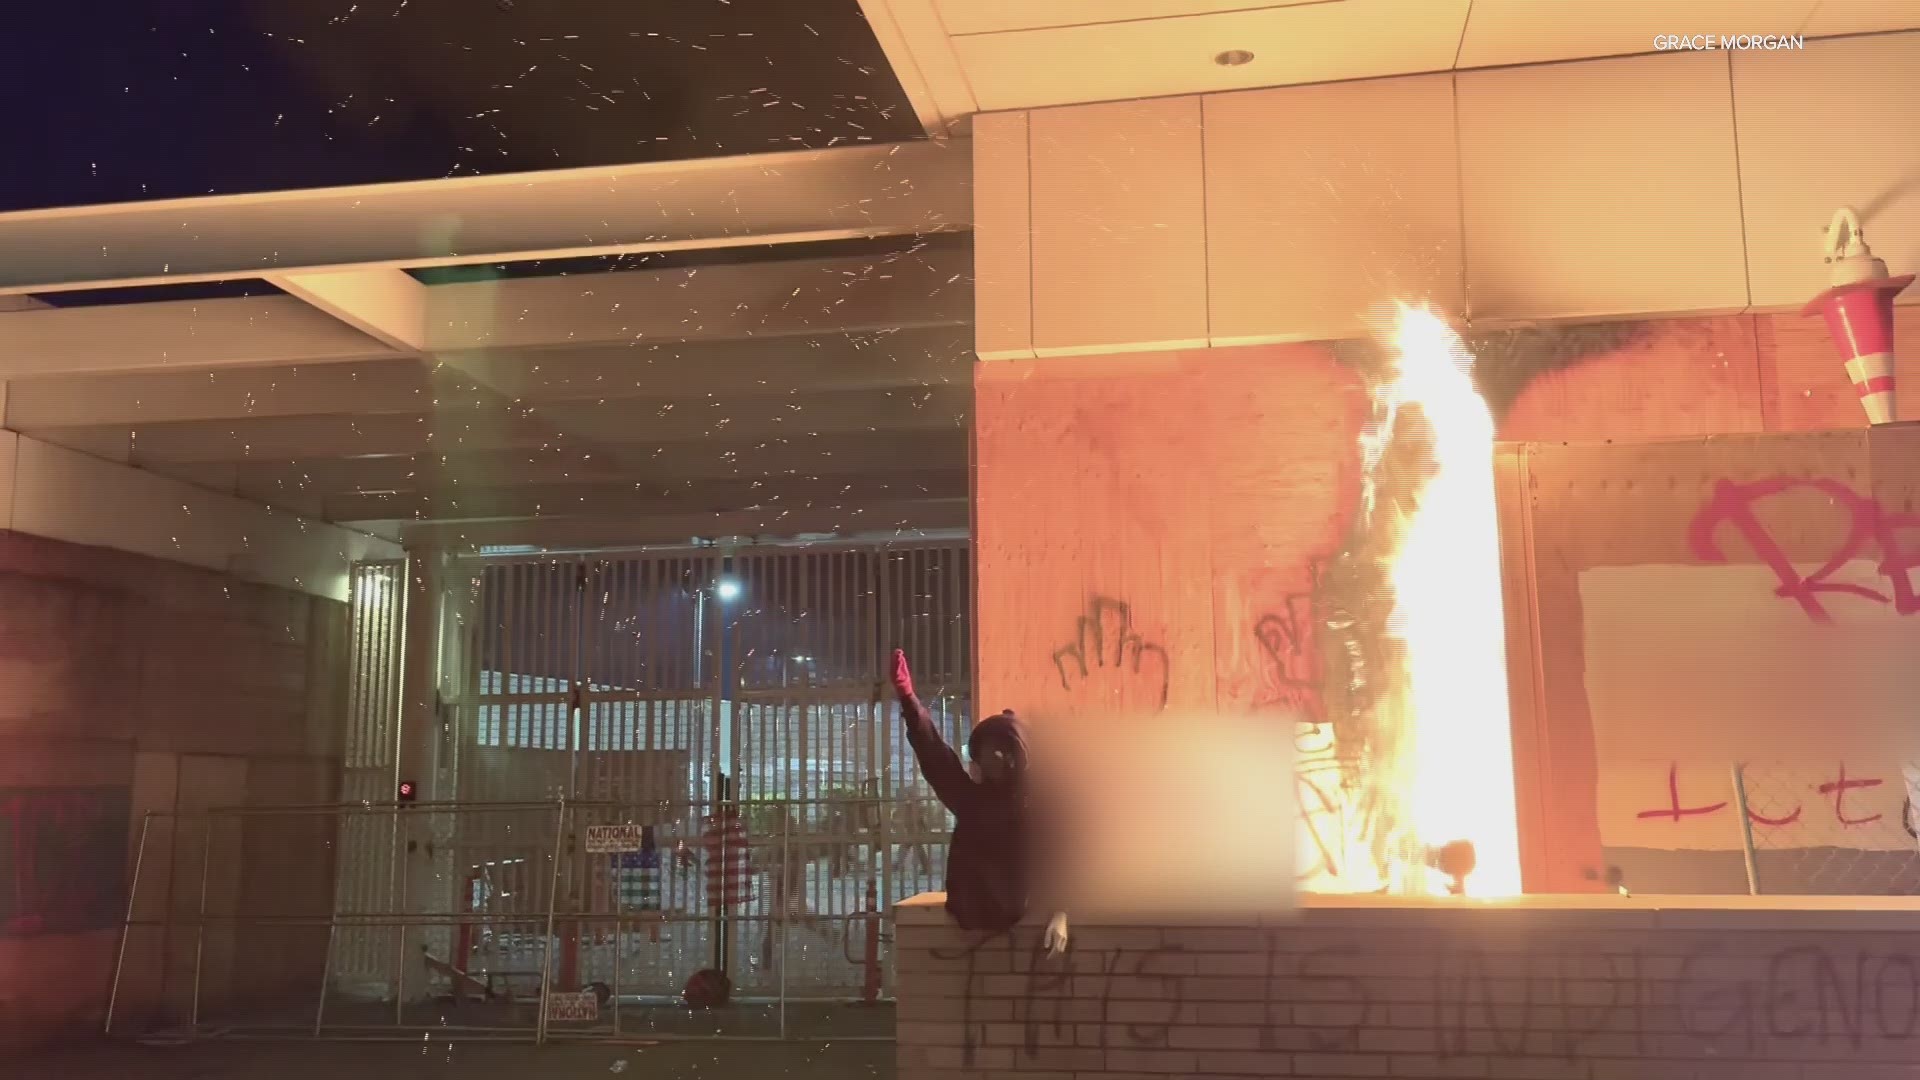 Video courtesy of Grace Morgan. A small fire was set outside the ICE building in Portland during a protest on Saturday, April 10.